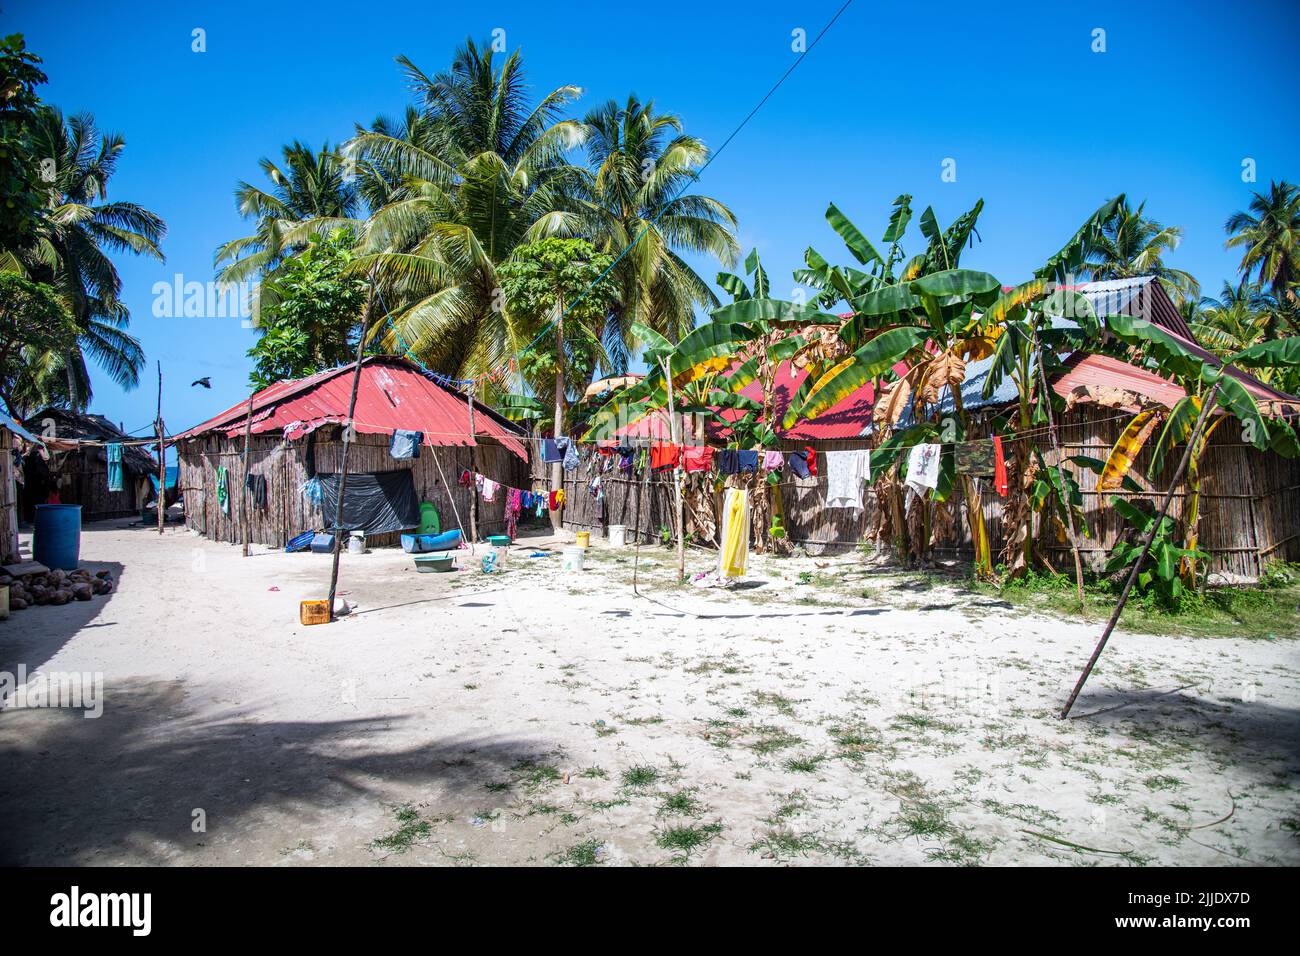 Indigenous huts on an island in the San Blas Islands in Panama Stock Photo